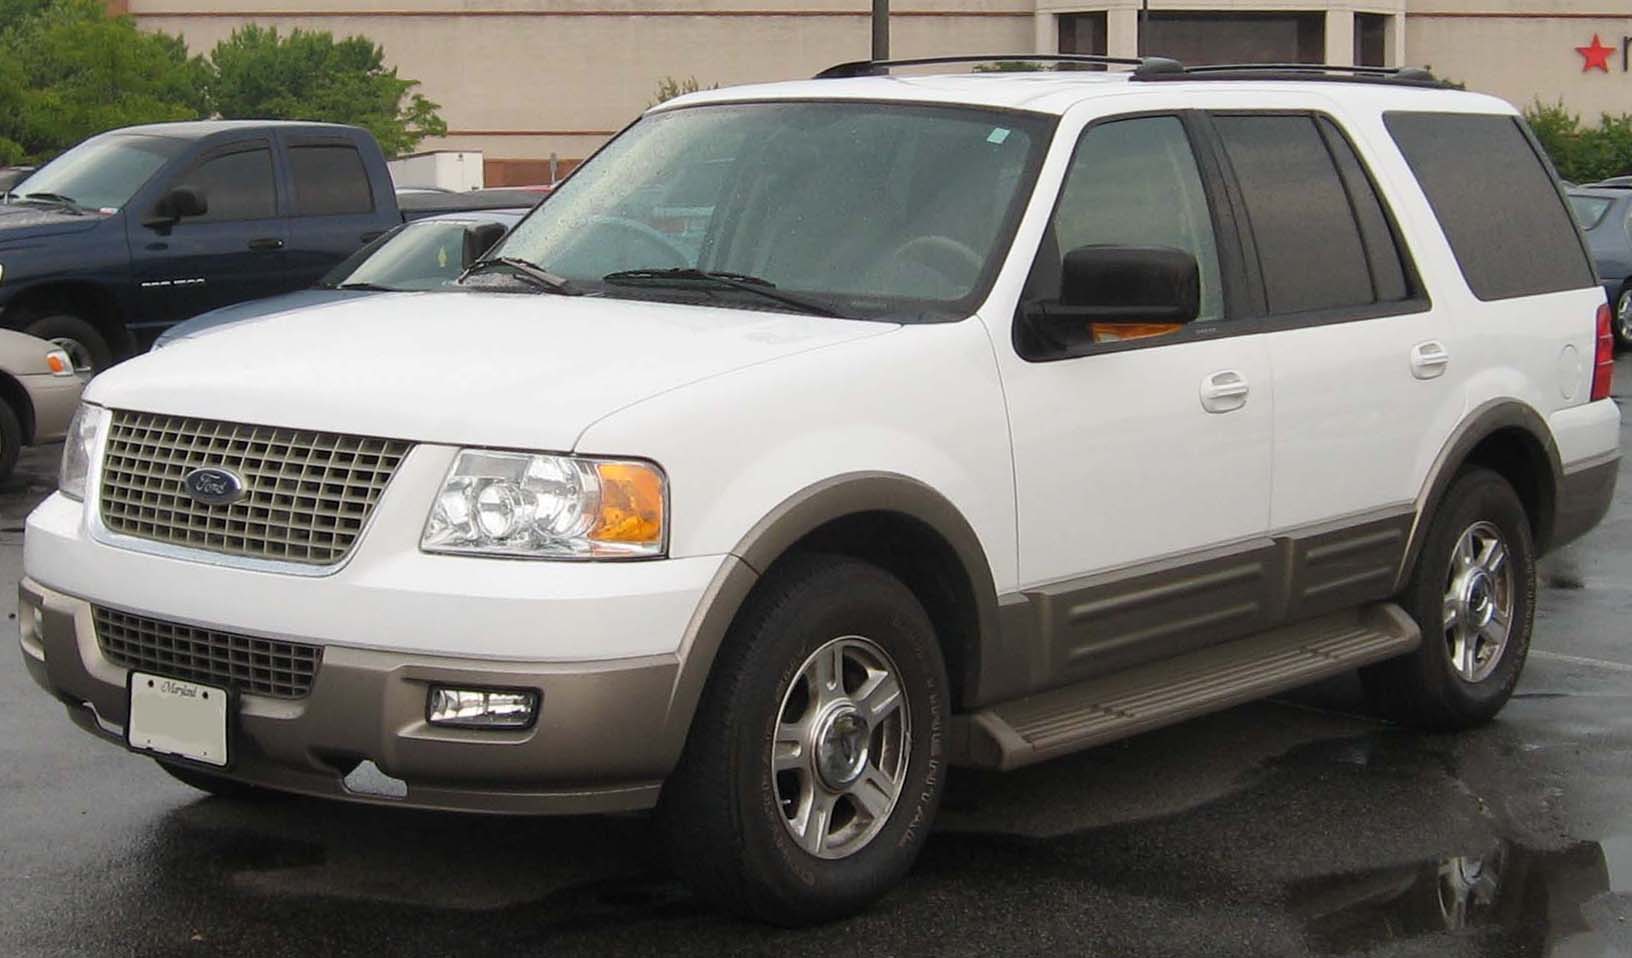 File:03-06 Ford Expedition EB.jpg - Wikipedia